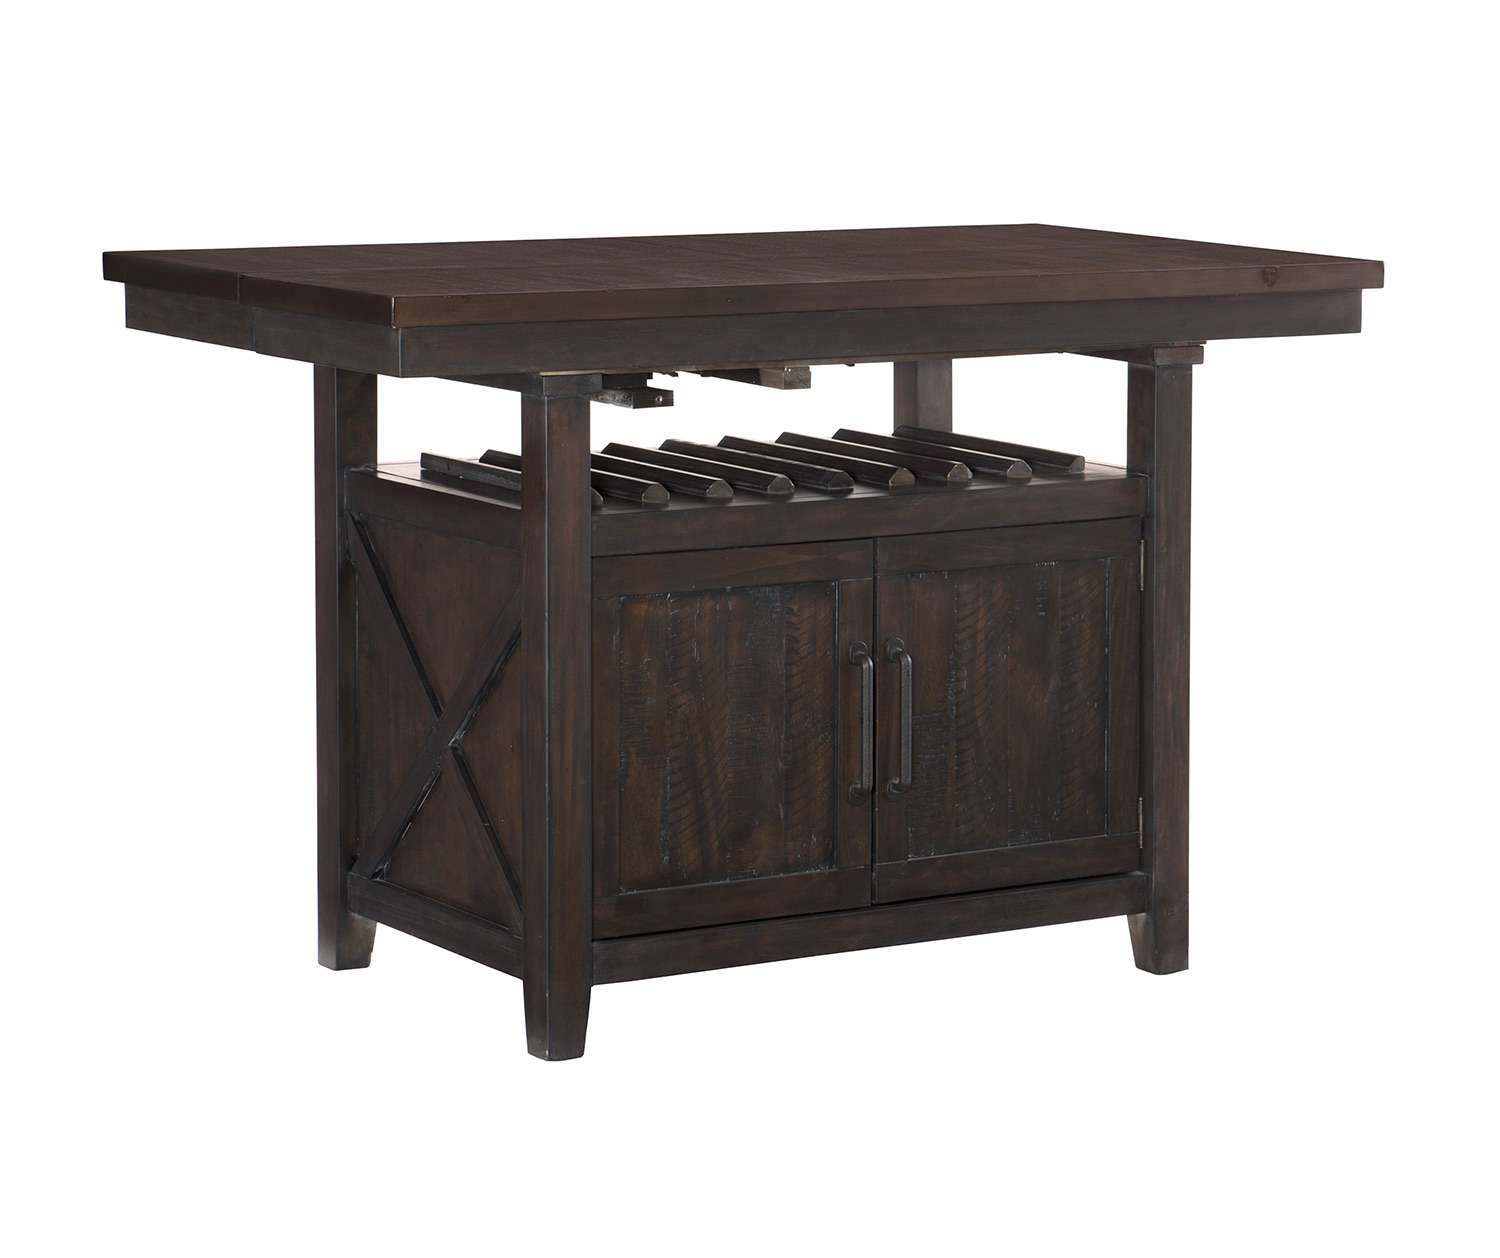 Homelegance Oxton Counter Height Table with Storage Base - Rustic Brown